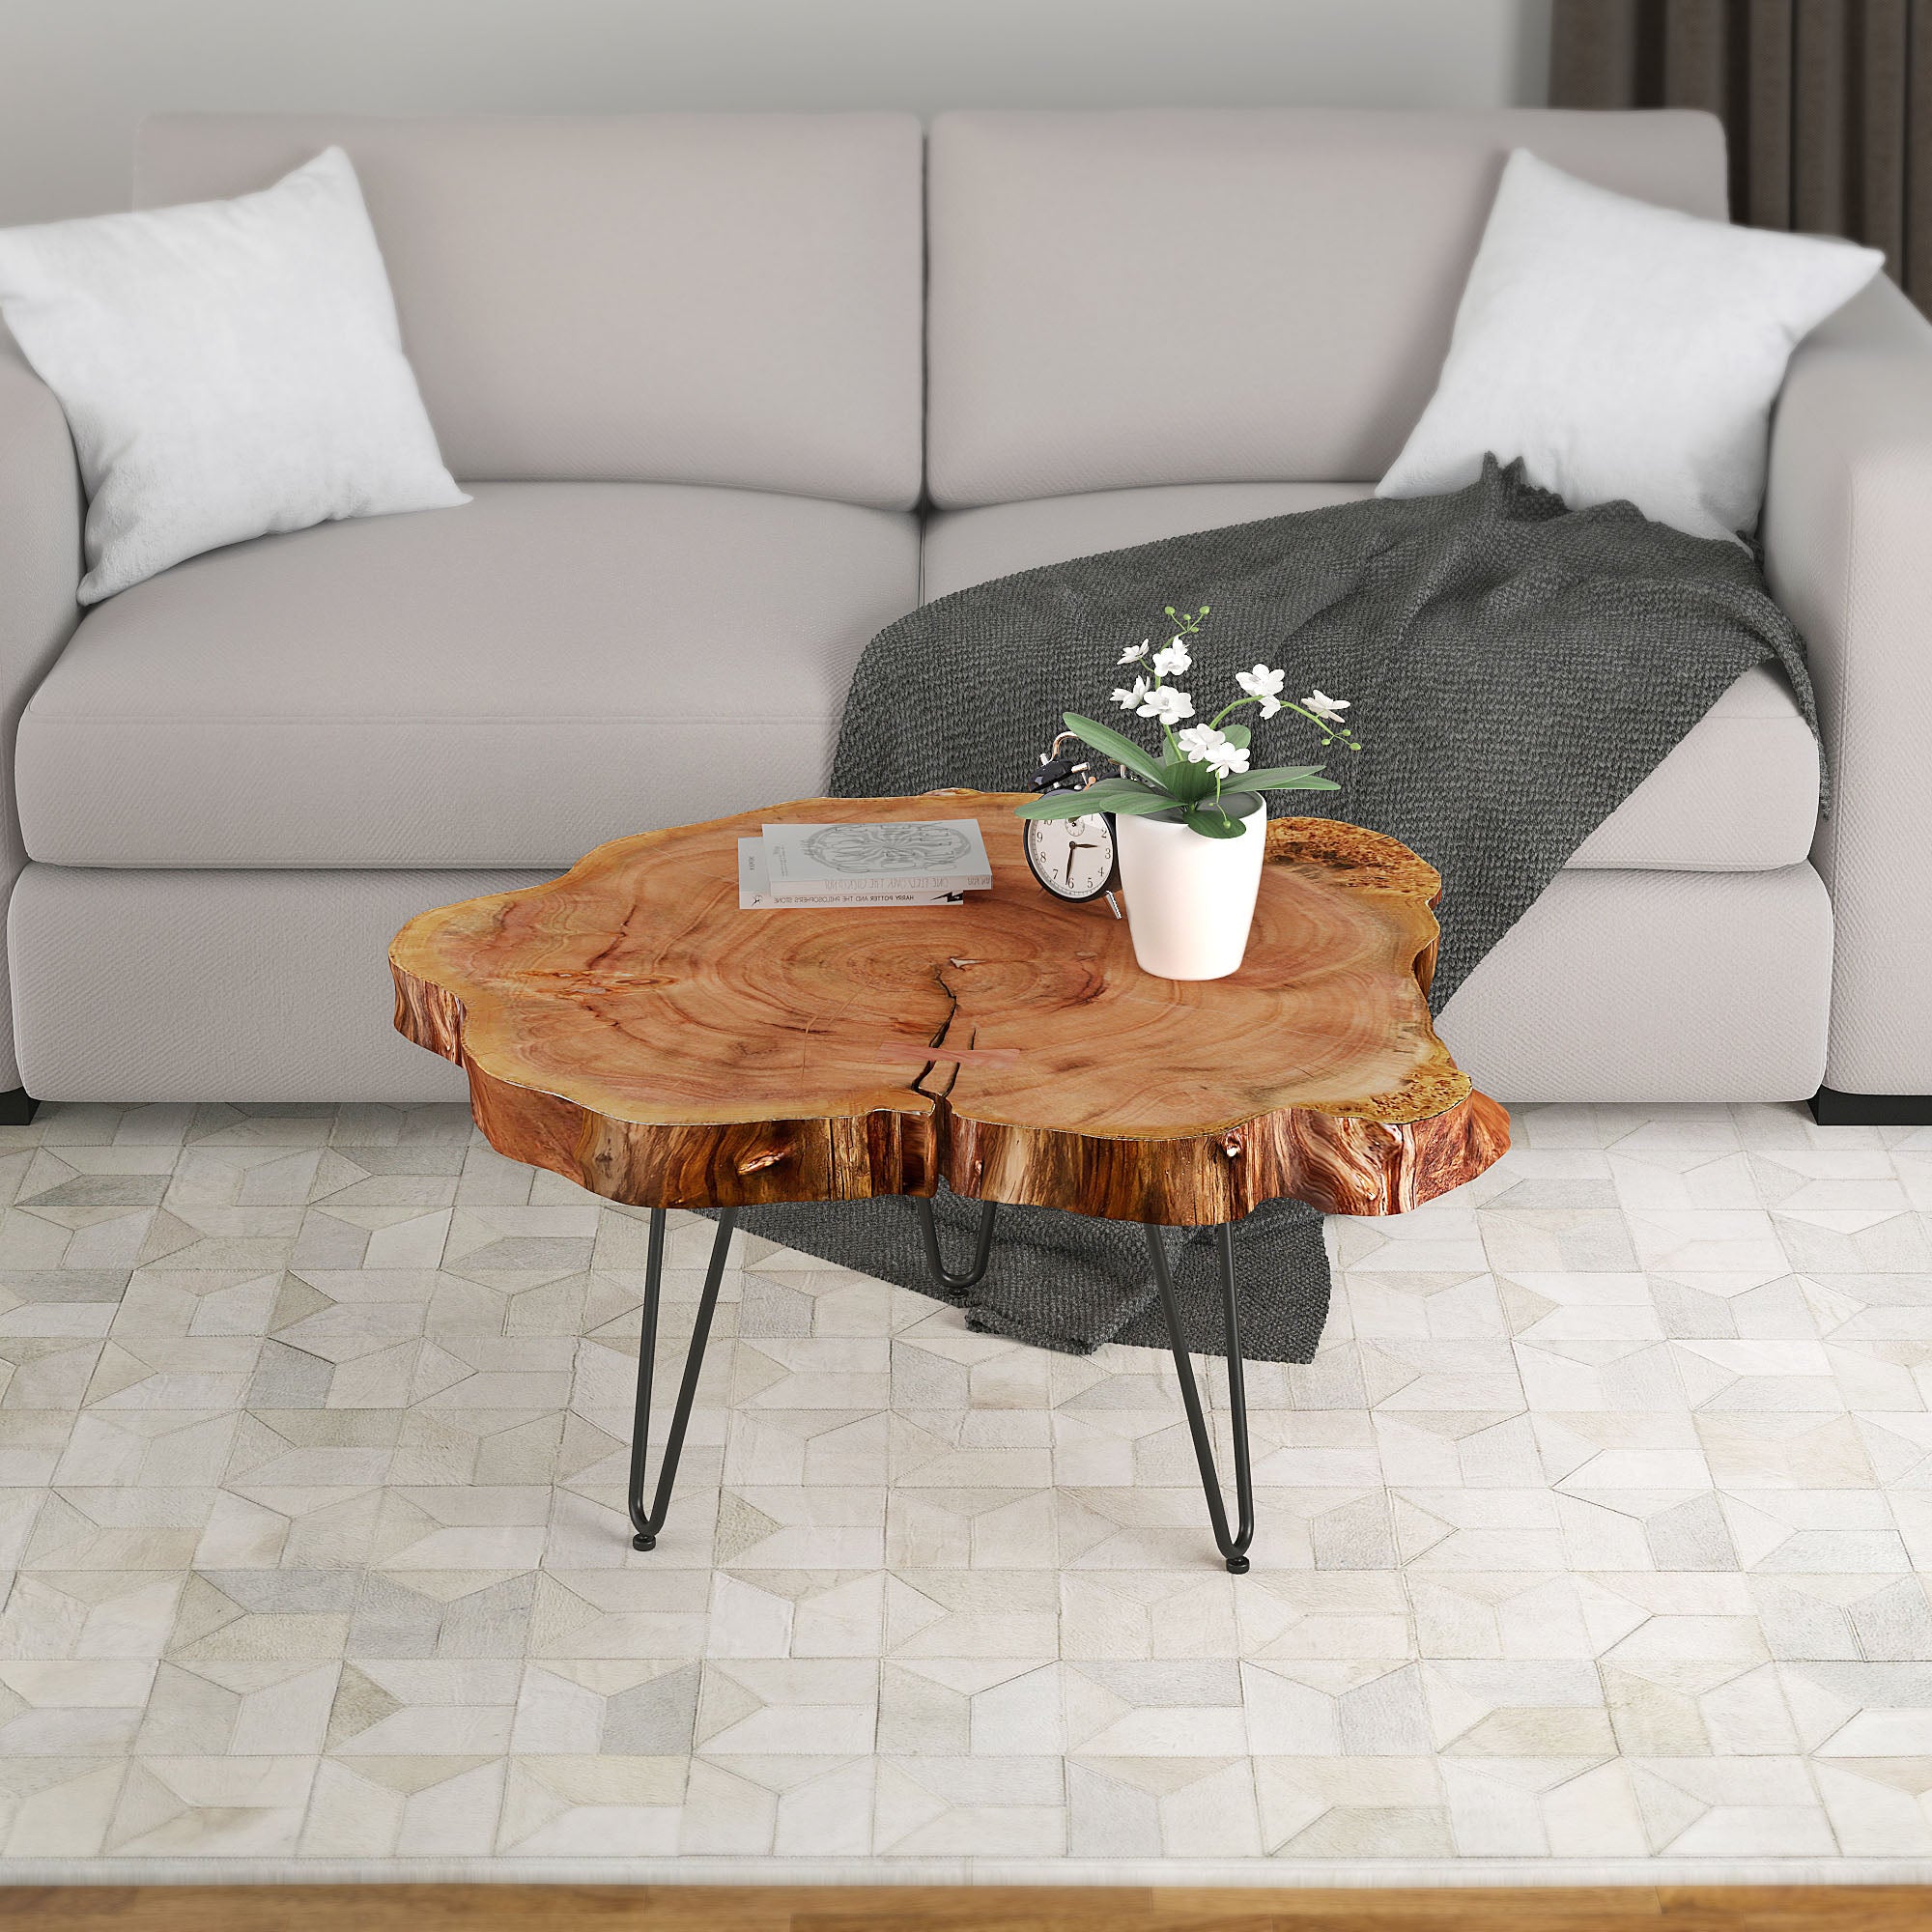 Nila Coffee Table in Natural and Black